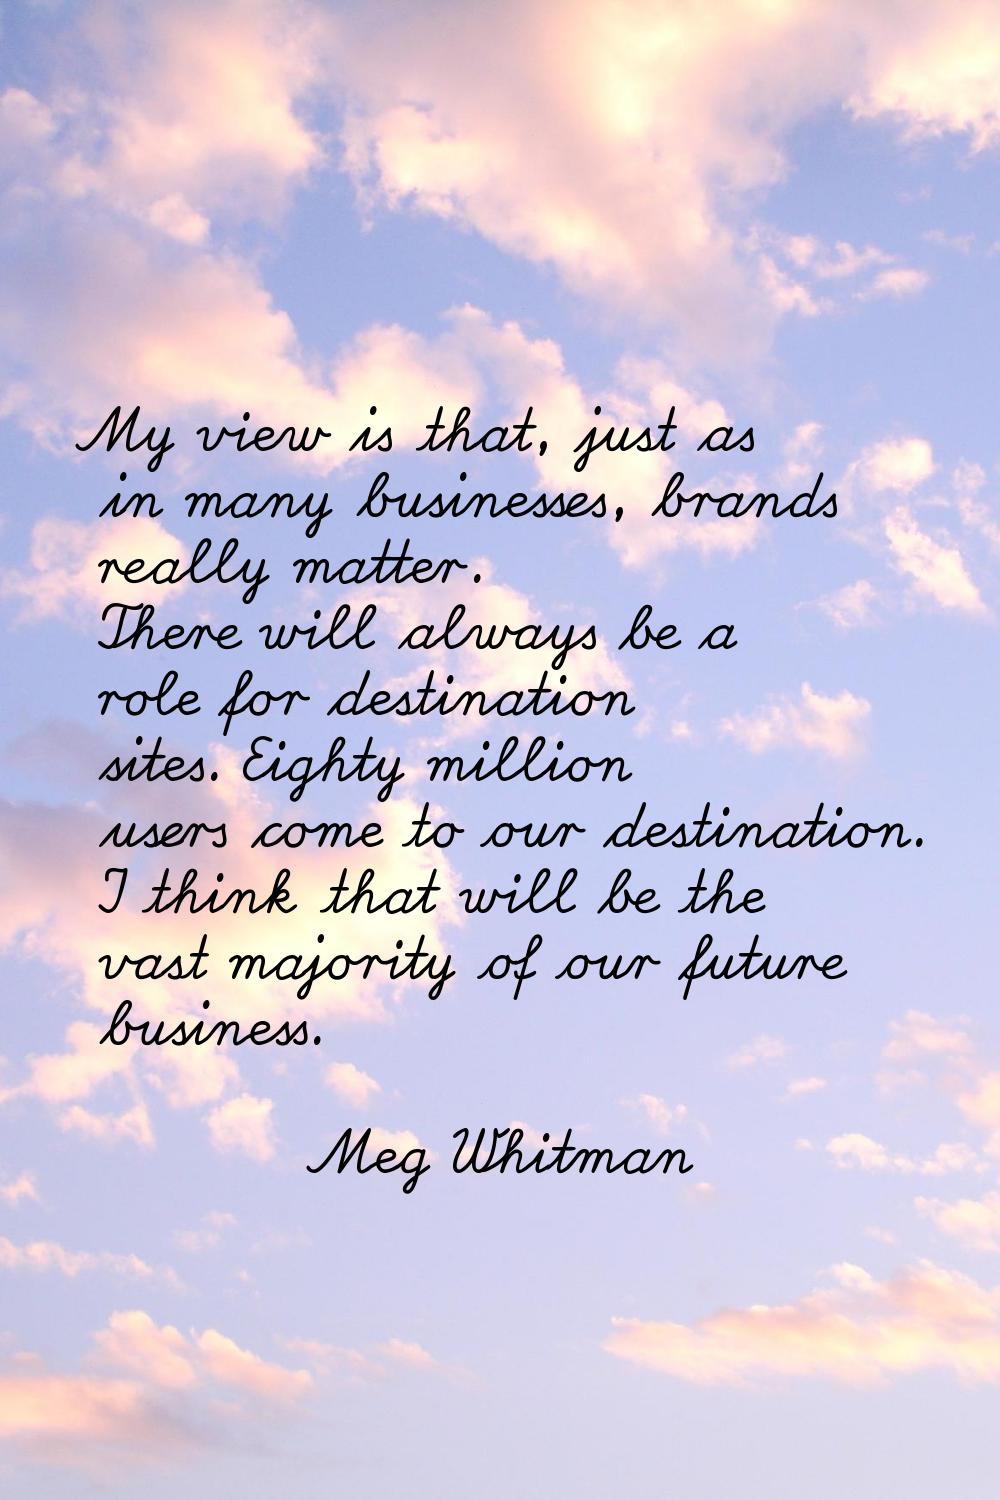 My view is that, just as in many businesses, brands really matter. There will always be a role for 